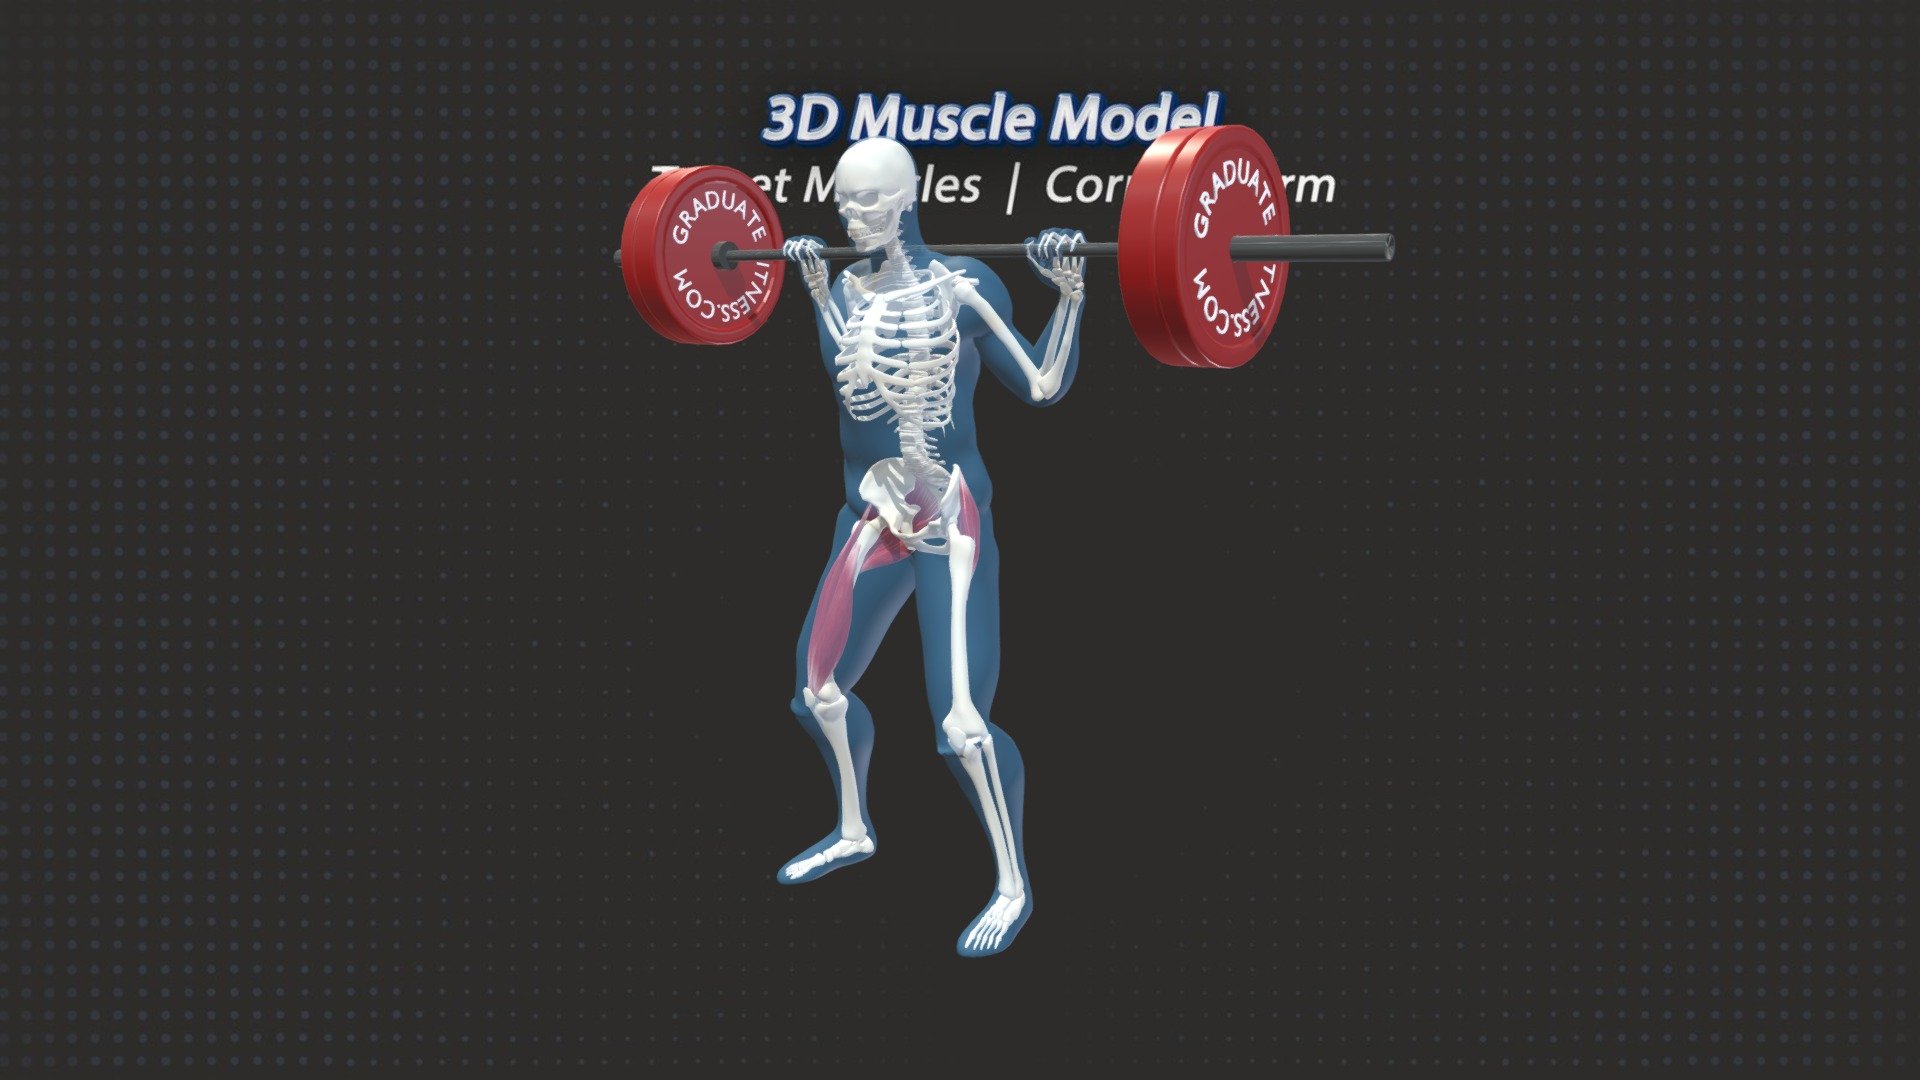 The Barbell Squat Muscles &amp; Anatomy 3D Model Designed For GraduateFitness.Com

1.Gluteus Maximus

The large Glute muscles extend the hip joint during the squat.

When the Glute max contracts it essentially pulls your femur (upper leg) back in line with your pelvis.

The Glute Max is one of the primary muscles responsible for this motion making it a primary mover of the squat exercise.

2.Quadriceps femoris (Quads)

The Quadriceps Femoris is the large 4 head muscle group at the front of your thigh.

This group of muscles is responsible for knee extension. (Taking the leg from a bent knee position back to a straight leg position)

3.Rectus Femoris.

The Rectus Femoris is the only muscle head of the Quads that crosses over the hip joint and attaches onto the Pelvis.

**See Annotations for more information. ** - The Barbell Squat Muscles & Anatomy - 3D model by 3D Muscle Model (@mikeshortall1991) 3d model